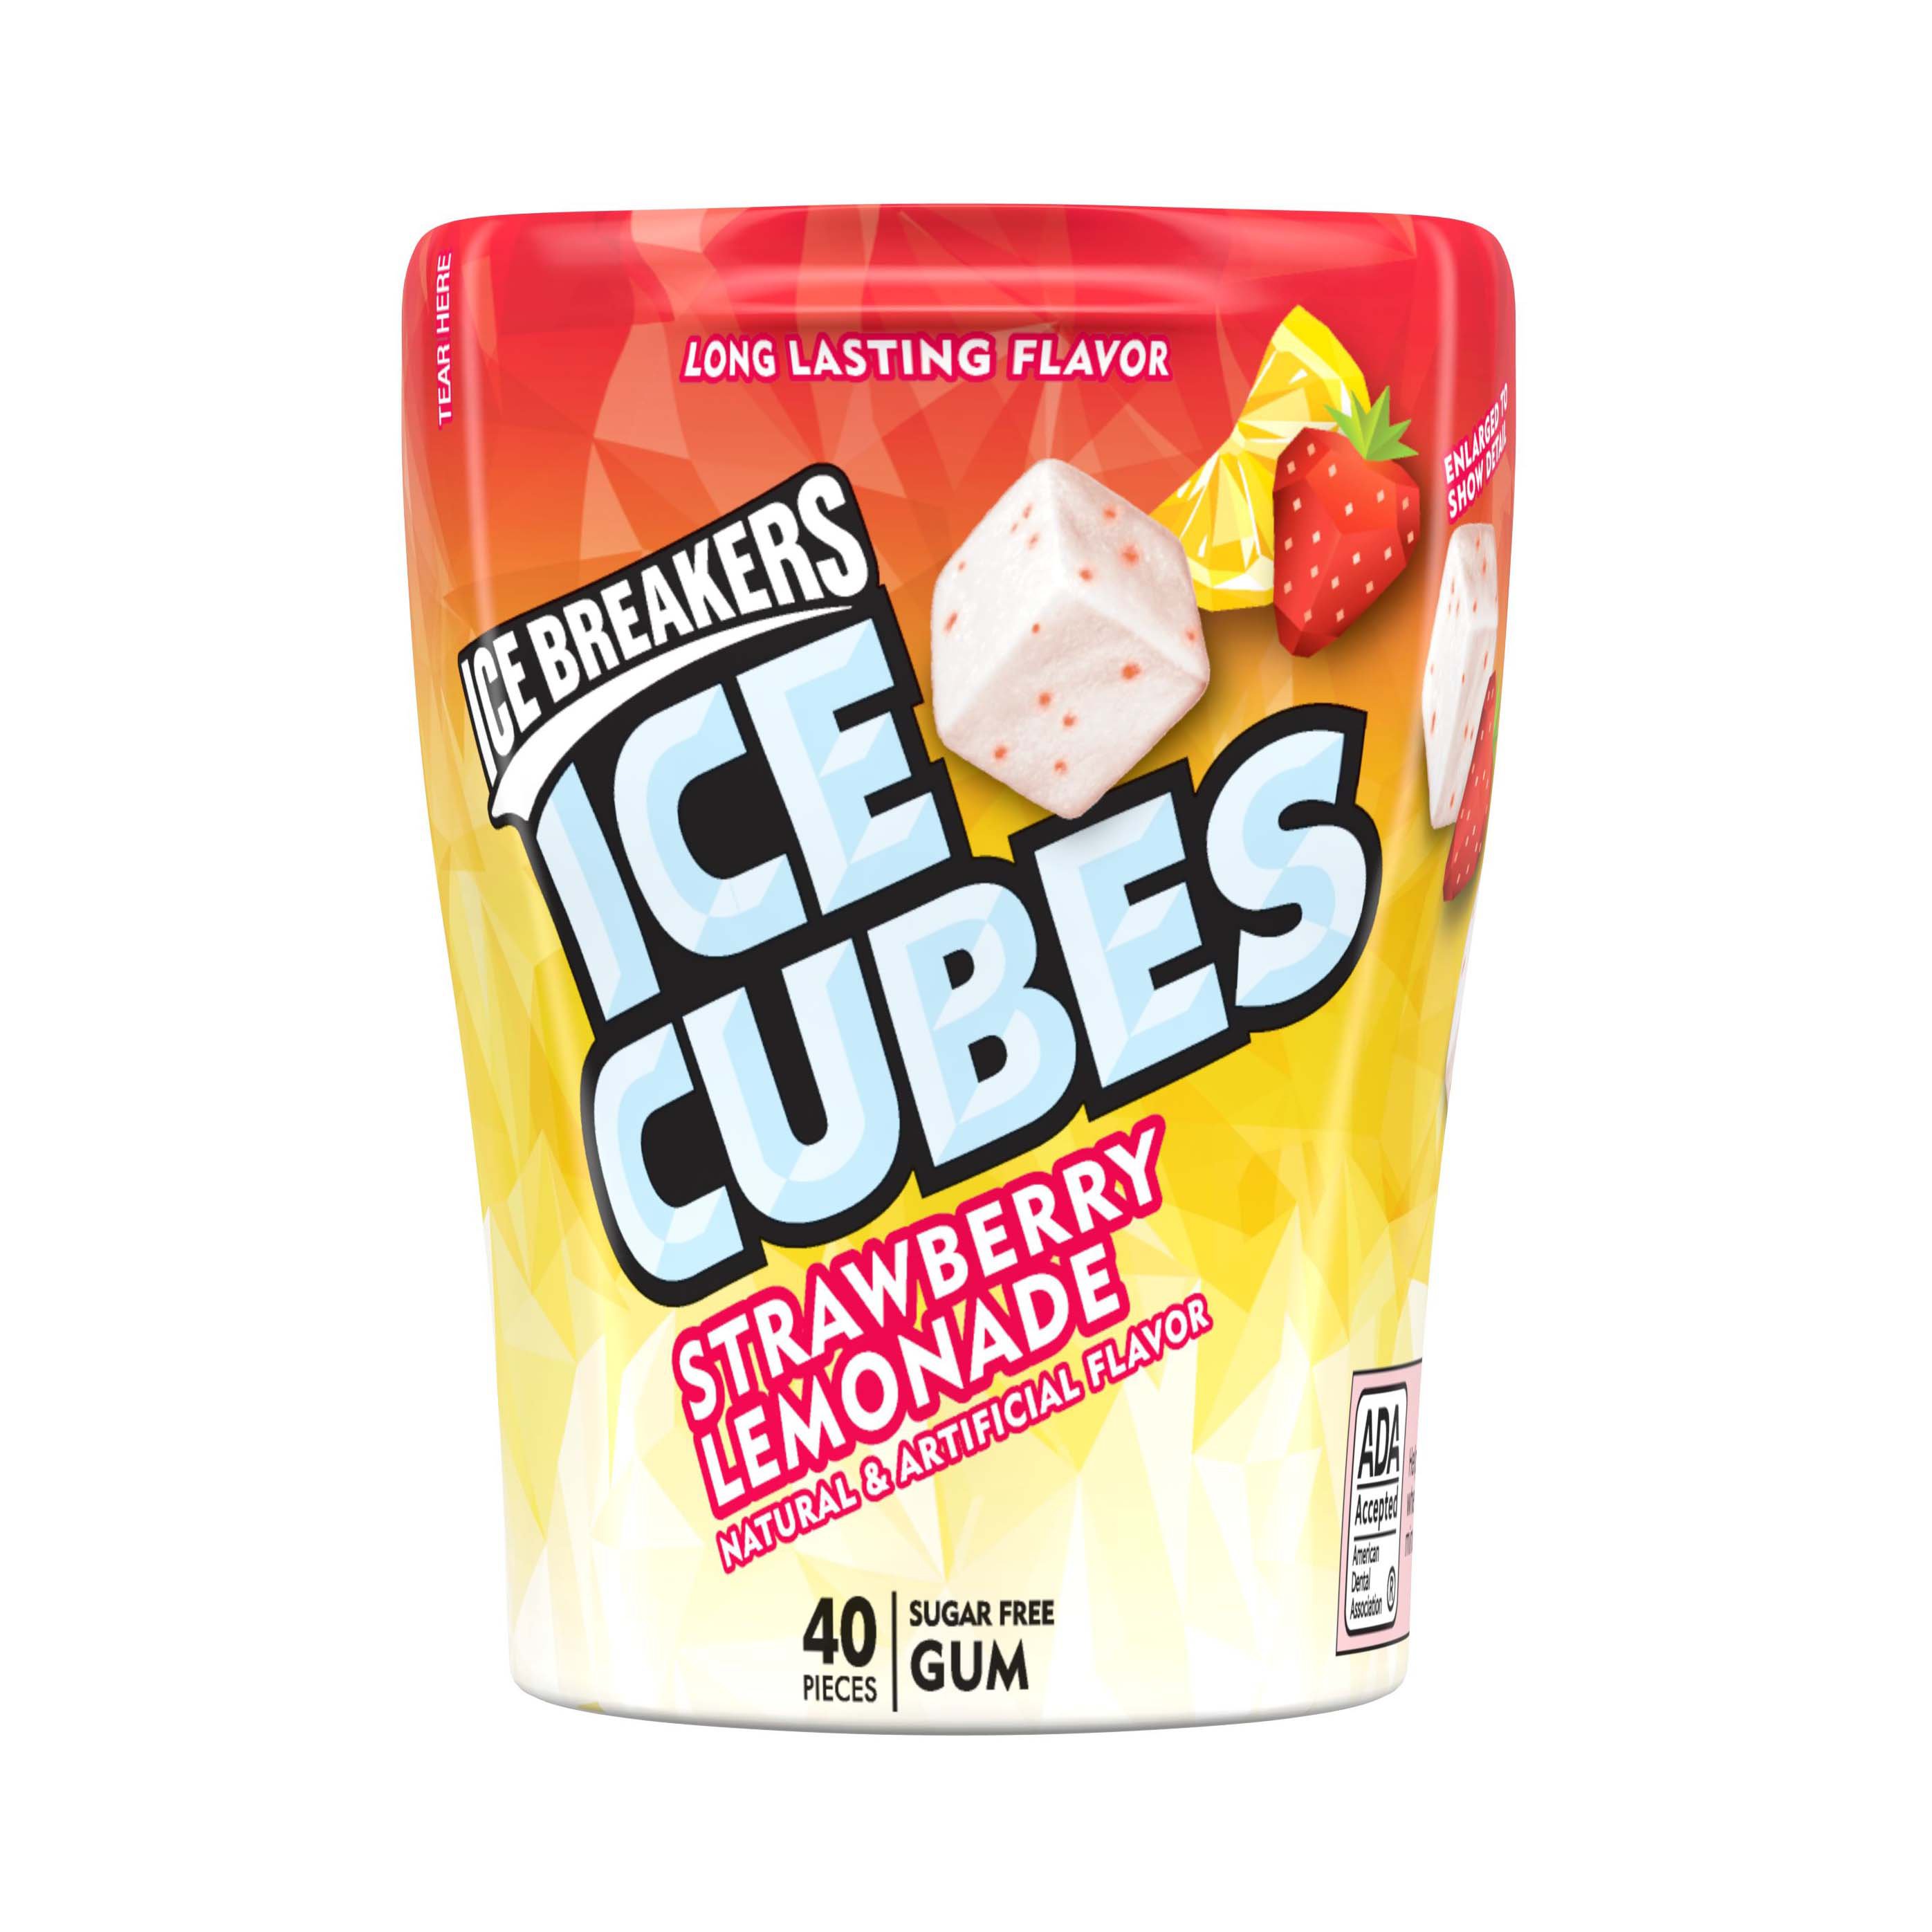 Ice Breakers Ice Cubes Strawberry Lemonade Sugar Free Gum Shop Gum And Mints At H E B